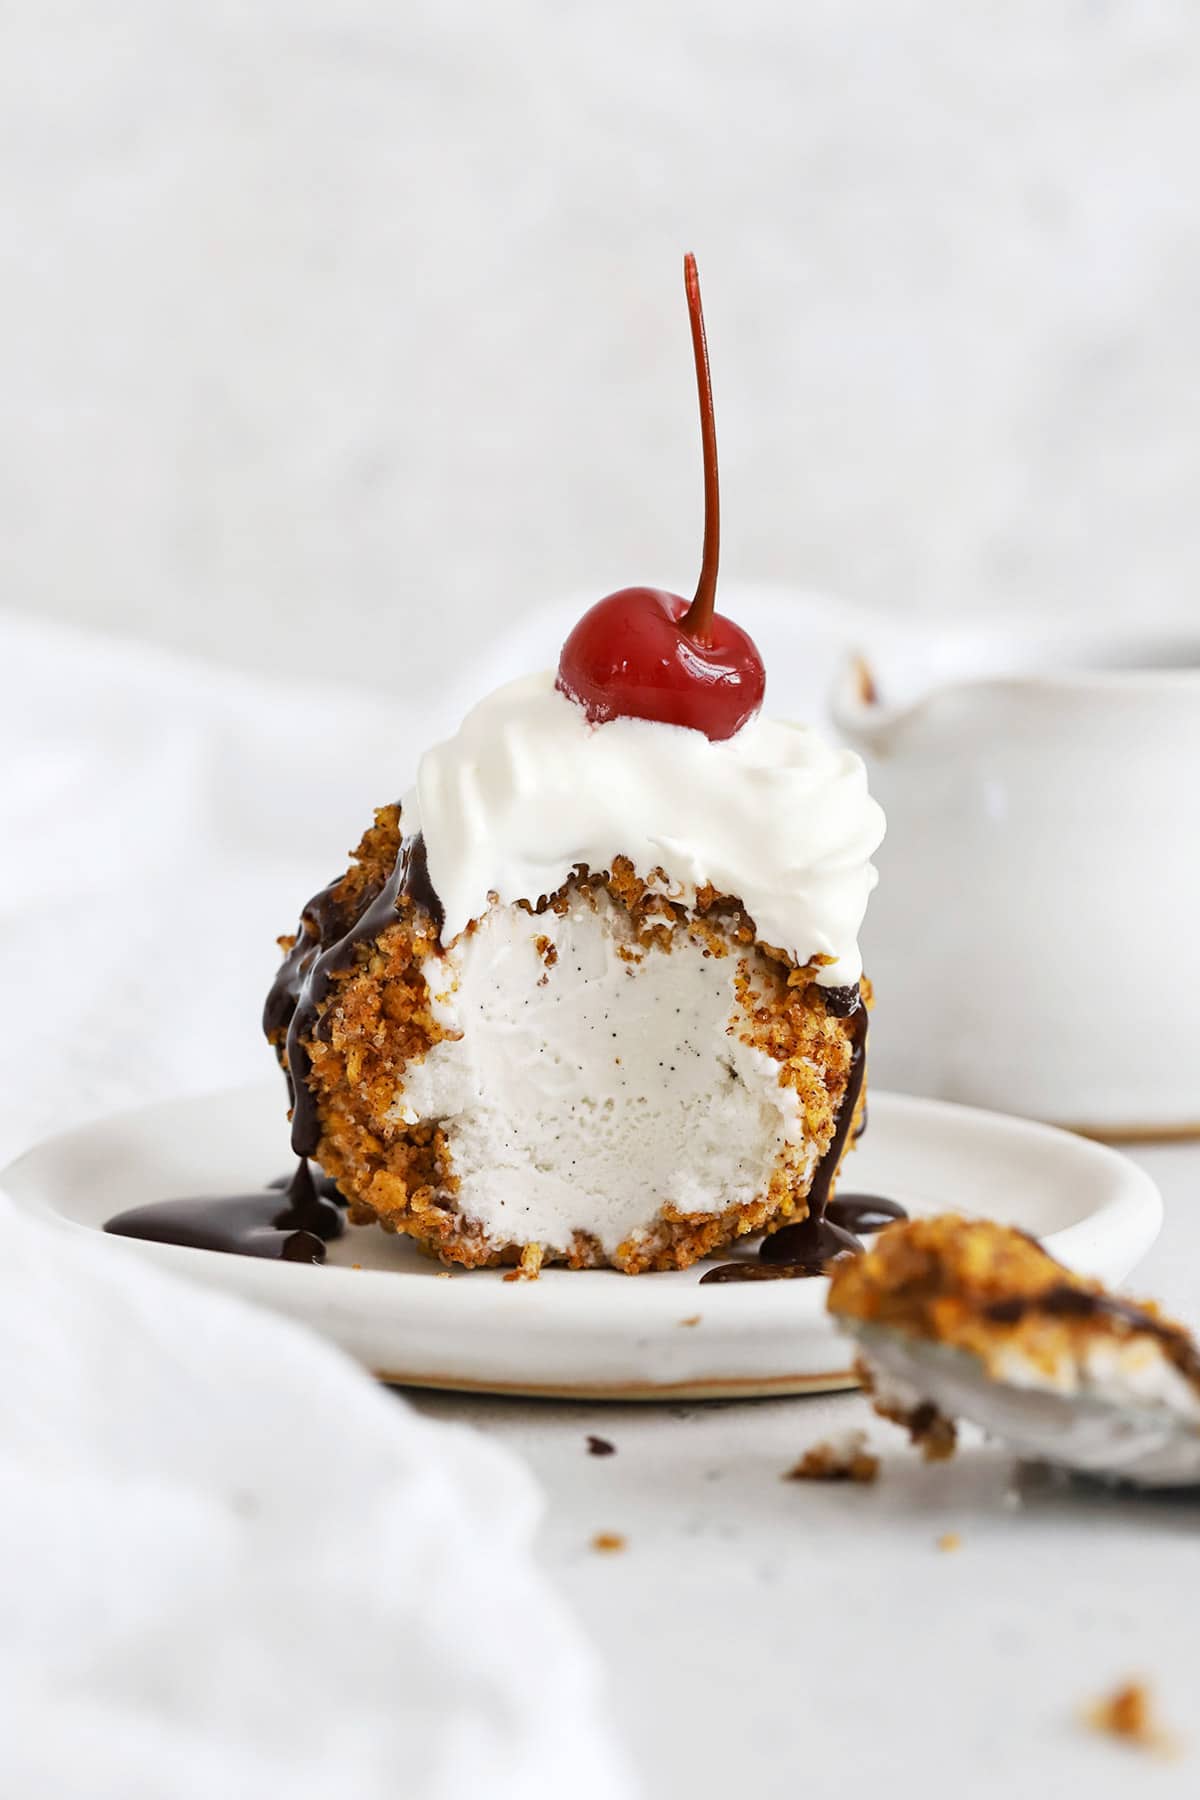 Front view of gluten-free fried ice cream with one bite scooped out of it